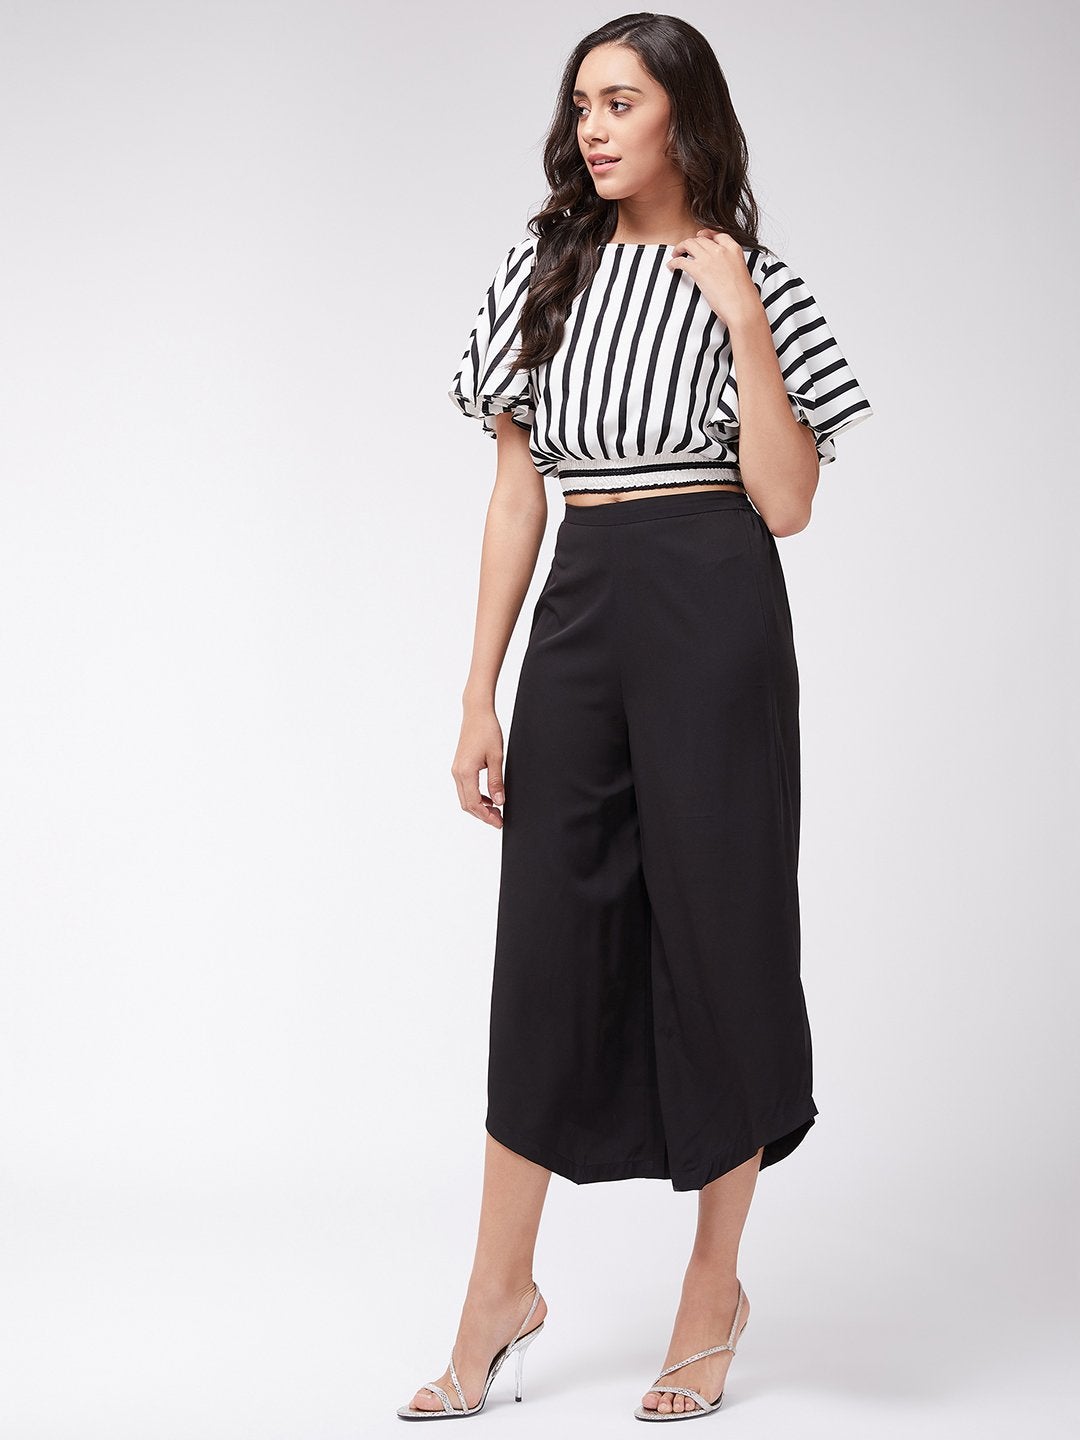 Women's Monocromatic Stripes Crop Top With Solid Pants - Pannkh